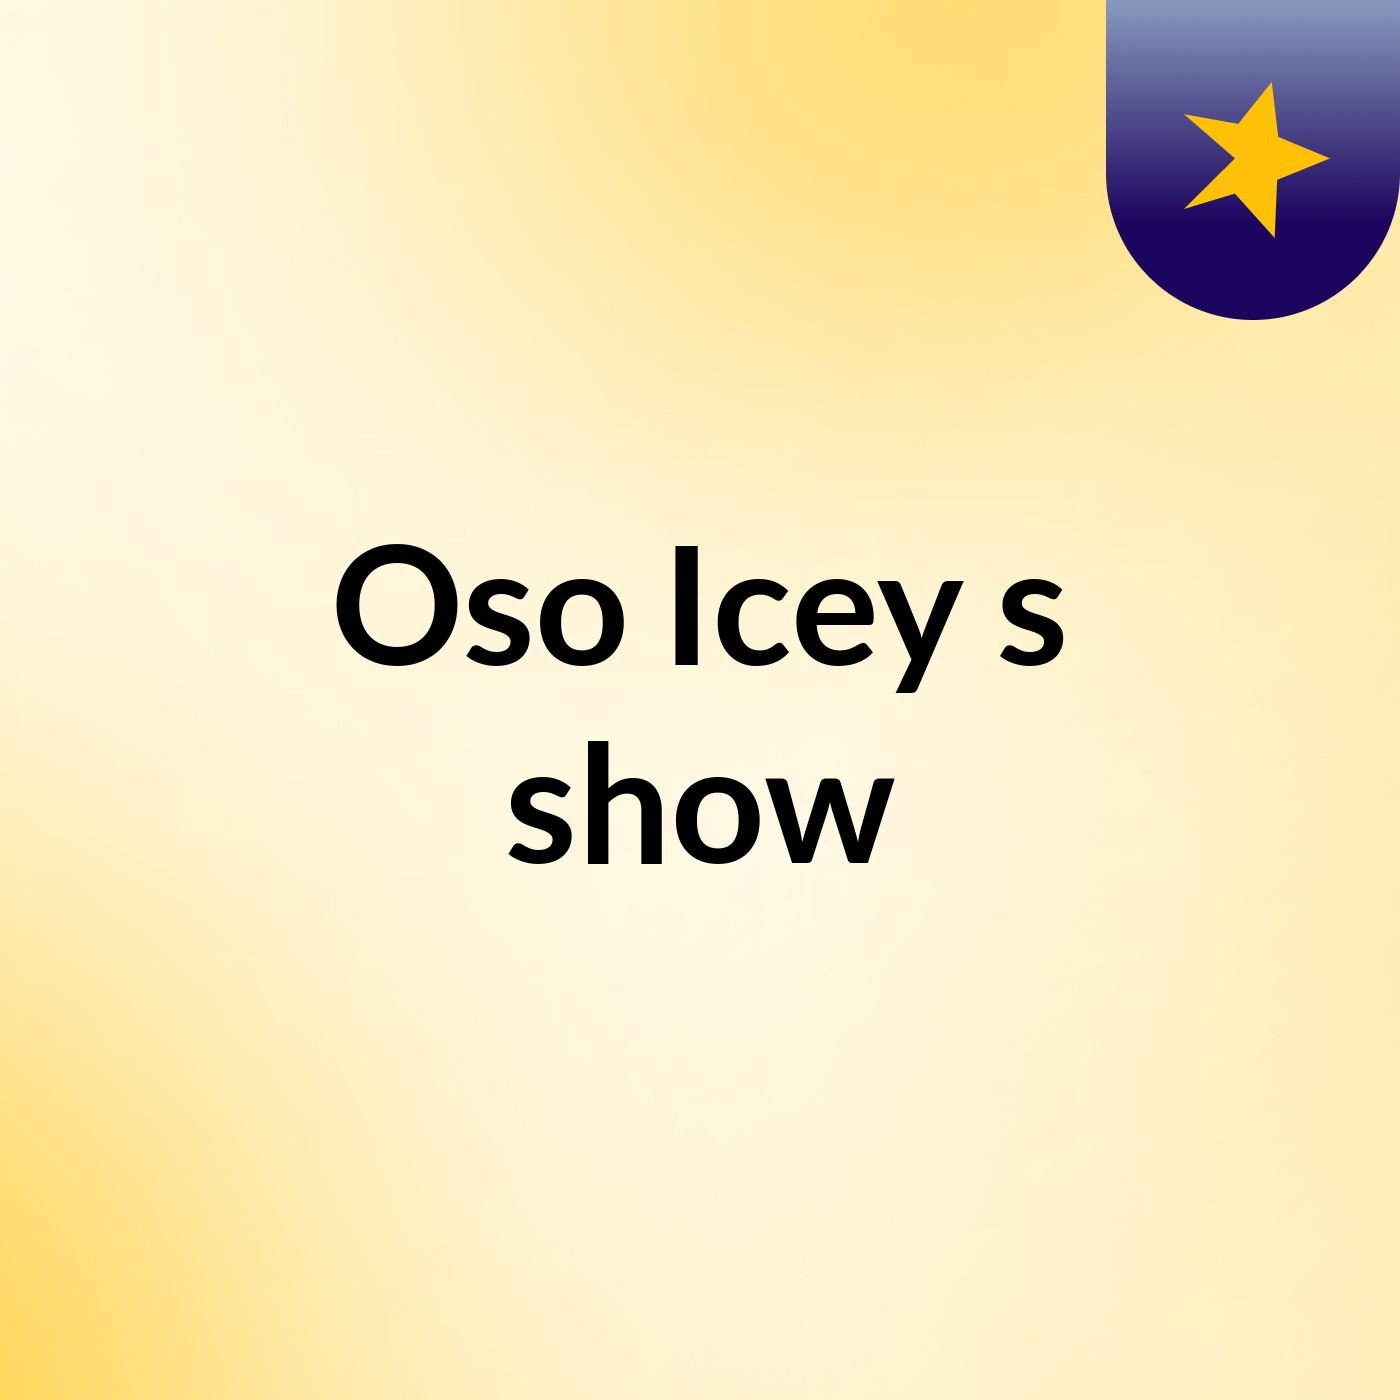 Oso Icey's show